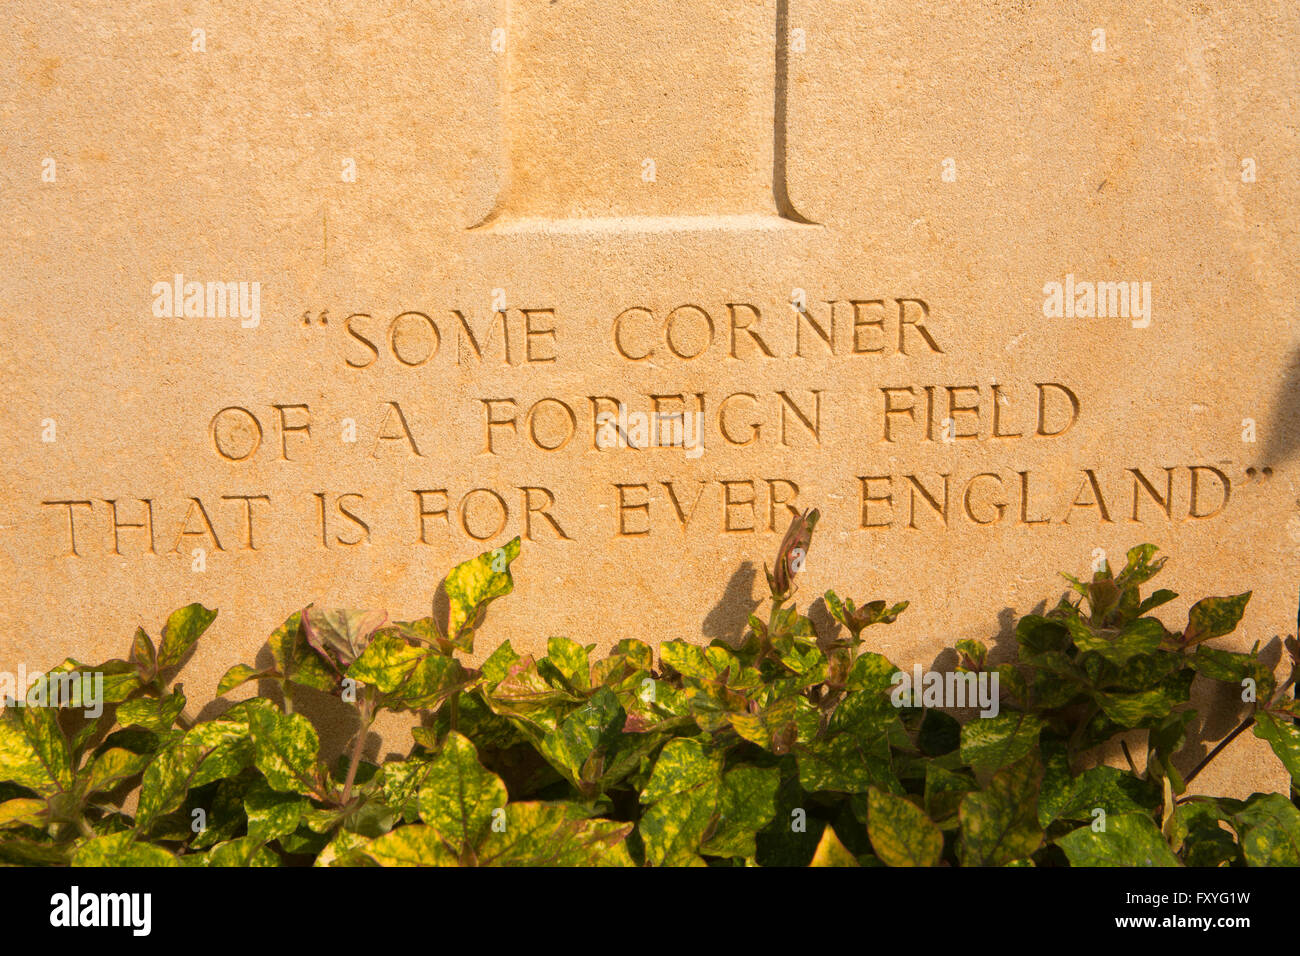 Sri Lanka, Kandy, War Cemetery, some corner of a foreign field, forever England Stock Photo